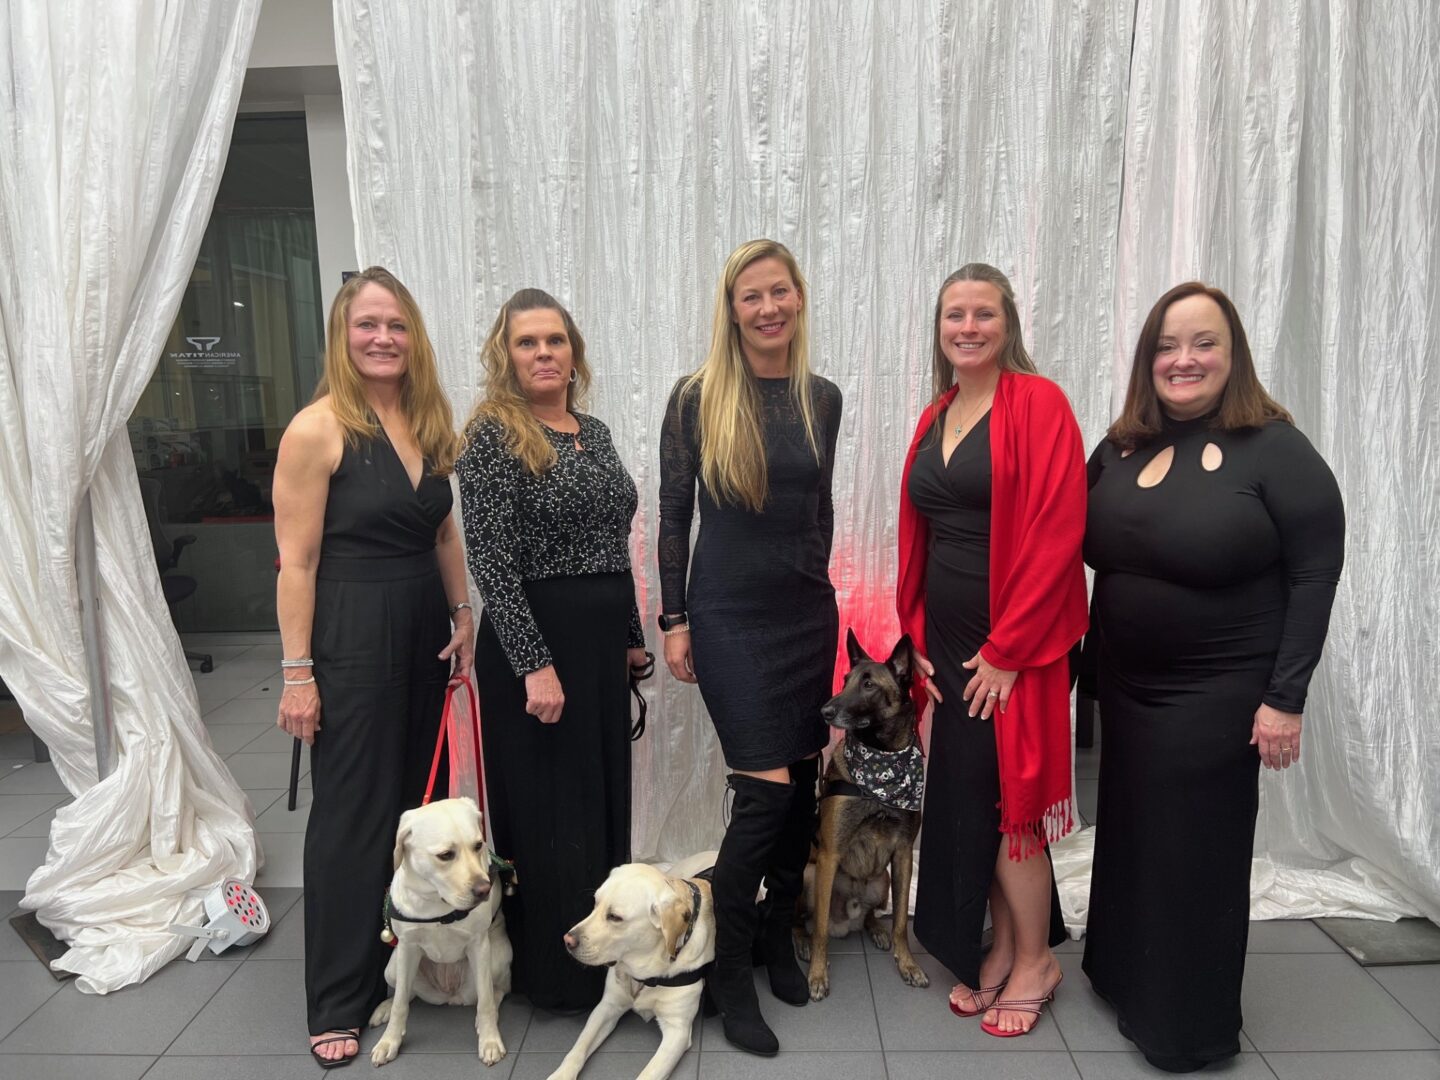 A group of women in black dresses posing with their dogs.